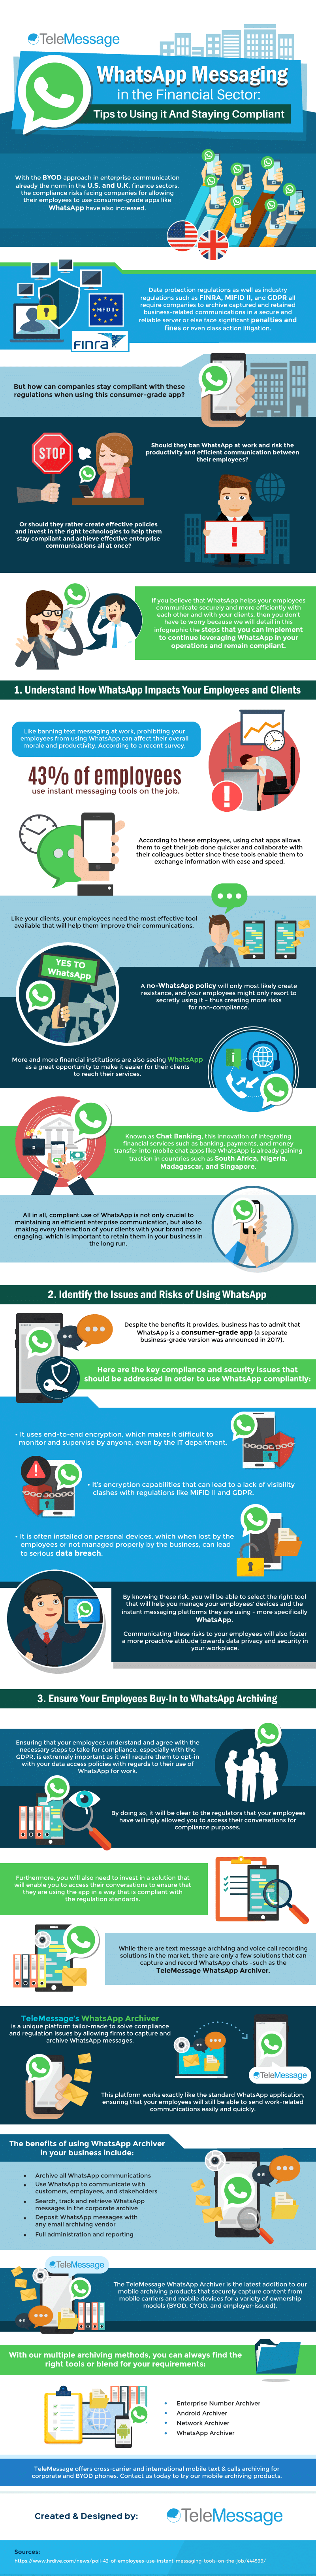 WhatsApp Messaging in the Financial Sector- Tips to Using it And Staying Compliant